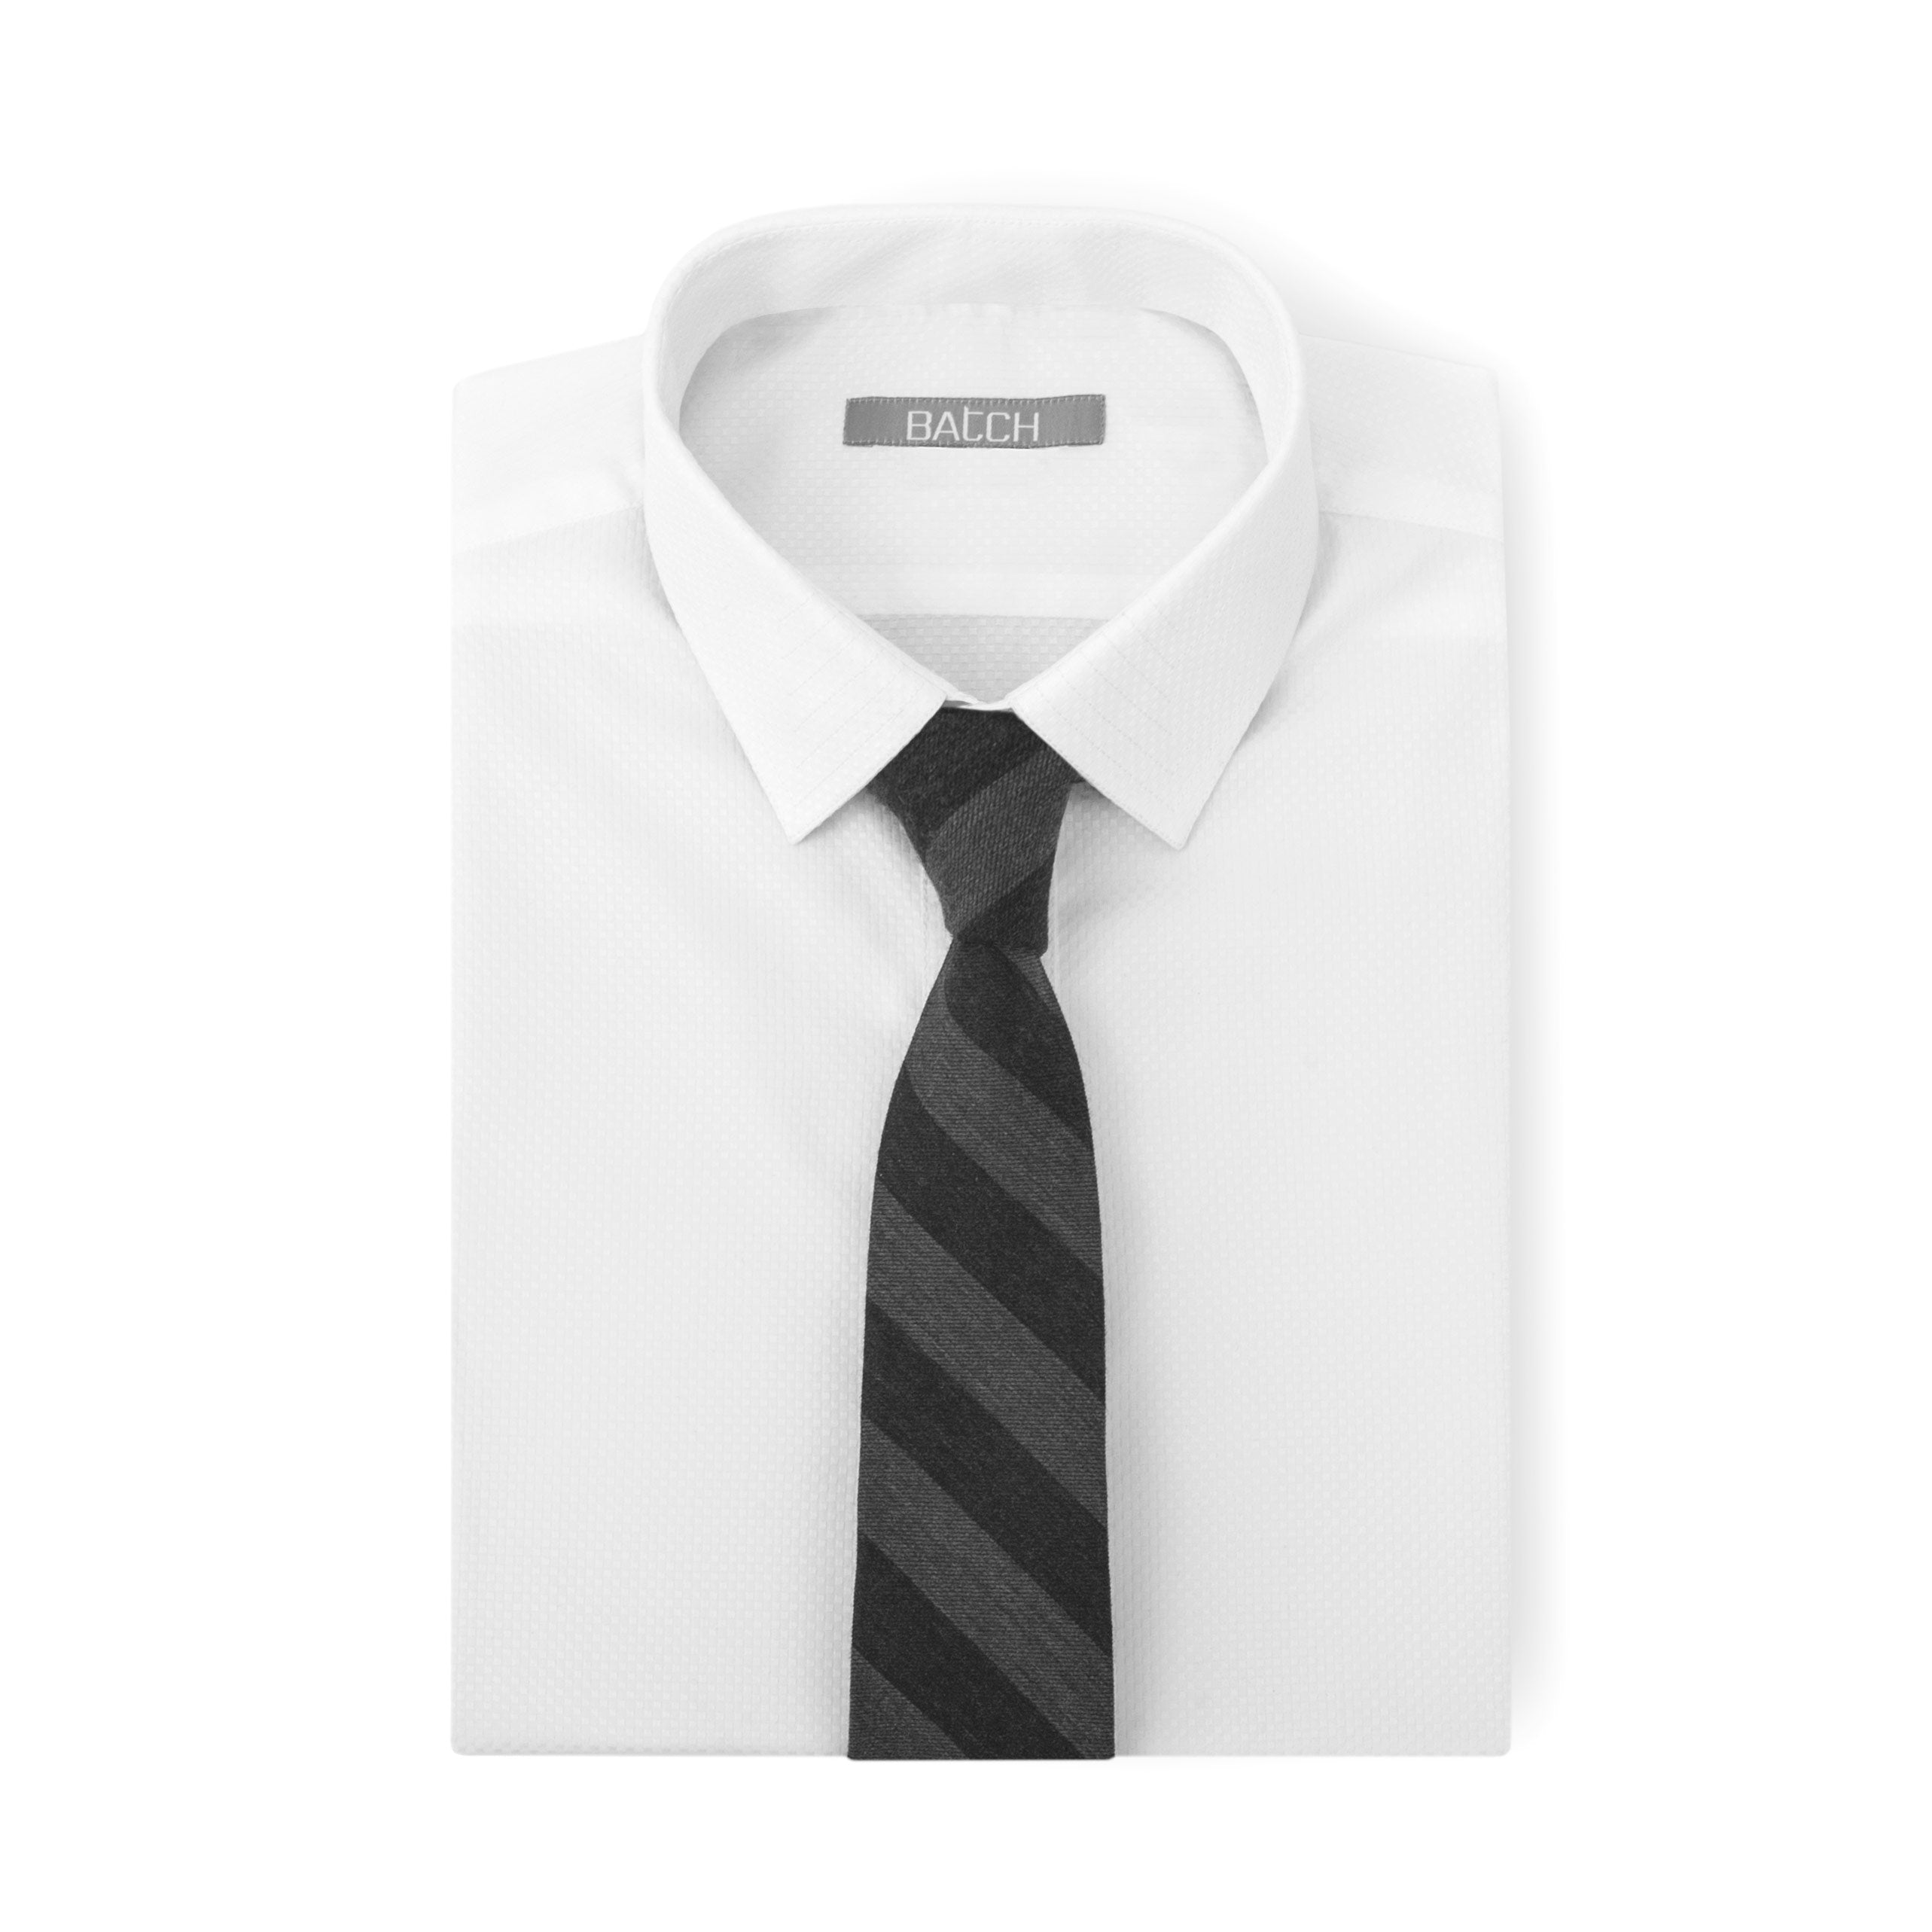 Arctic White Shirt with Tie